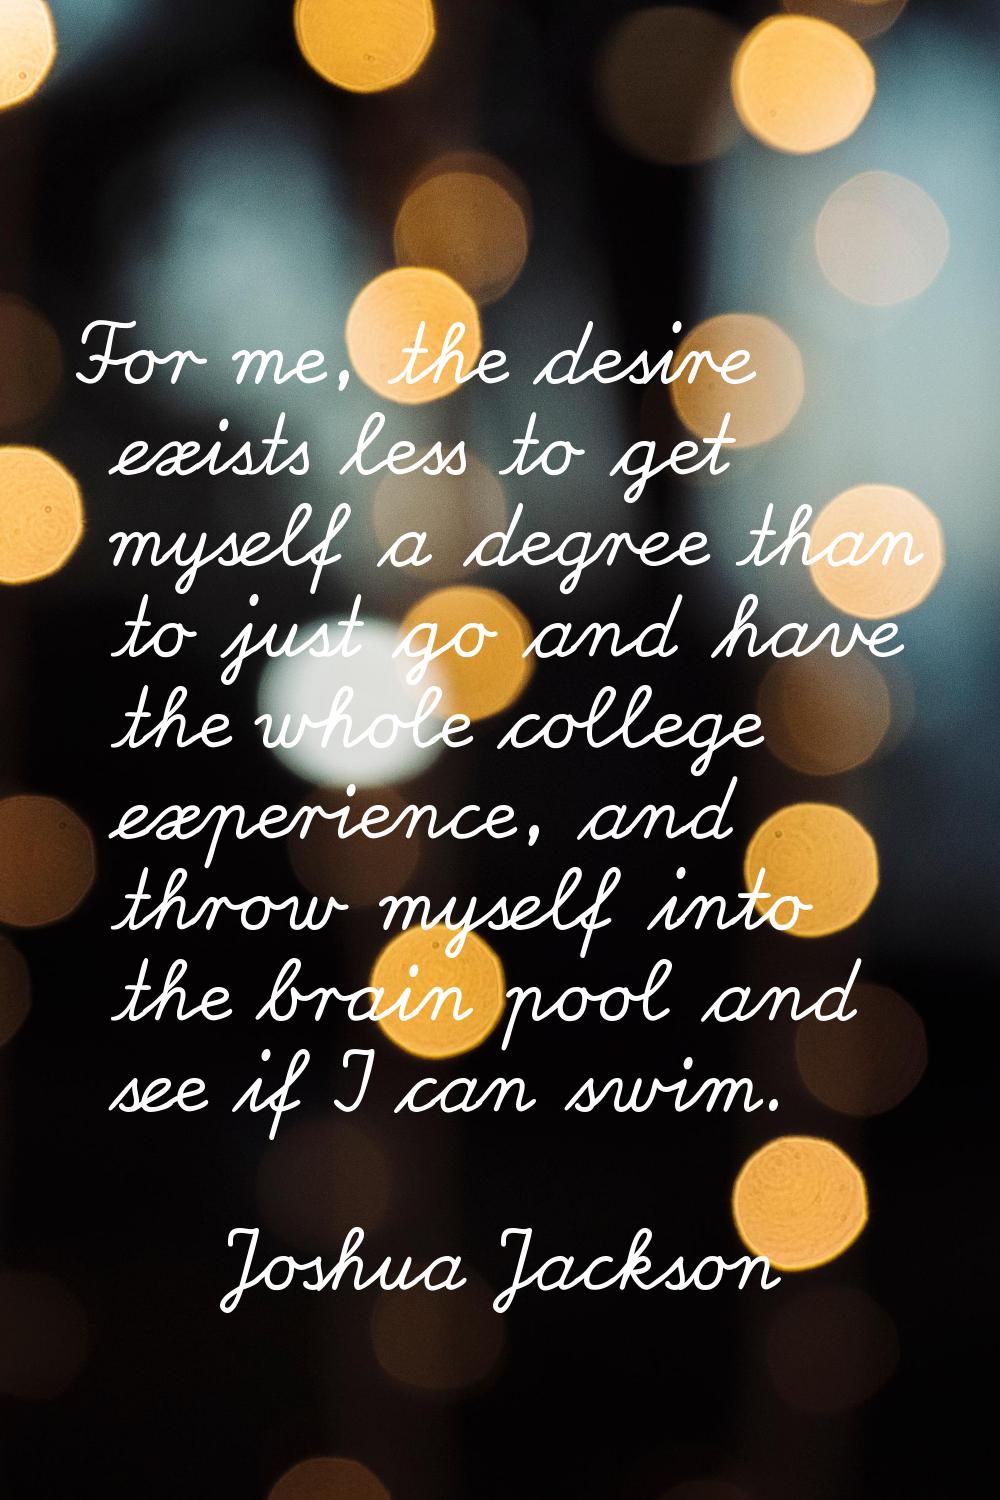 For me, the desire exists less to get myself a degree than to just go and have the whole college ex